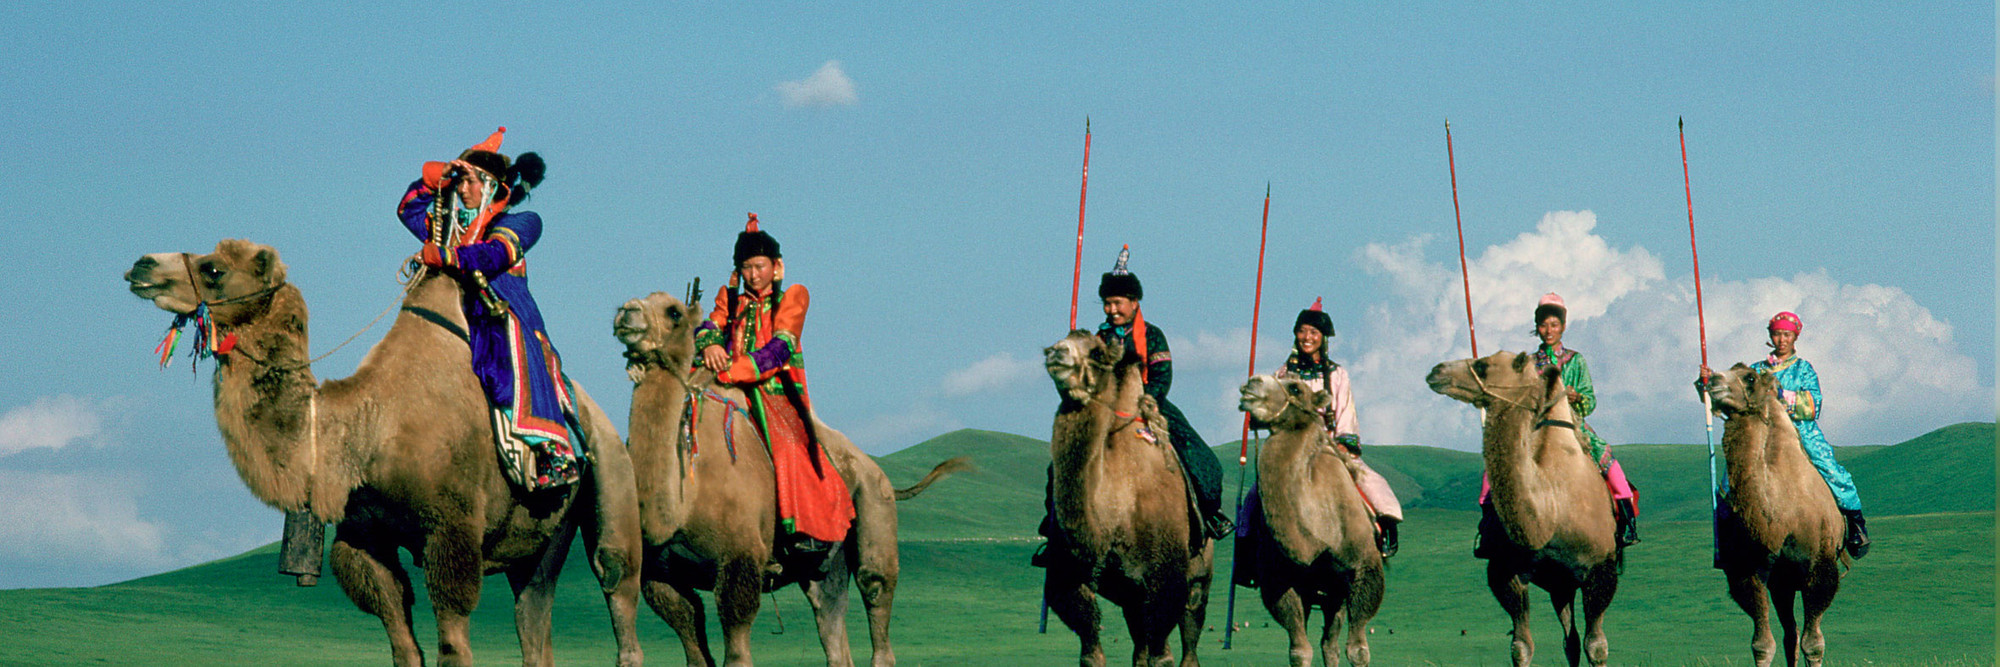 Johanna D’Arc of Mongolia. 1989. West Germany/France. Written and directed by Ulrike Ottinger